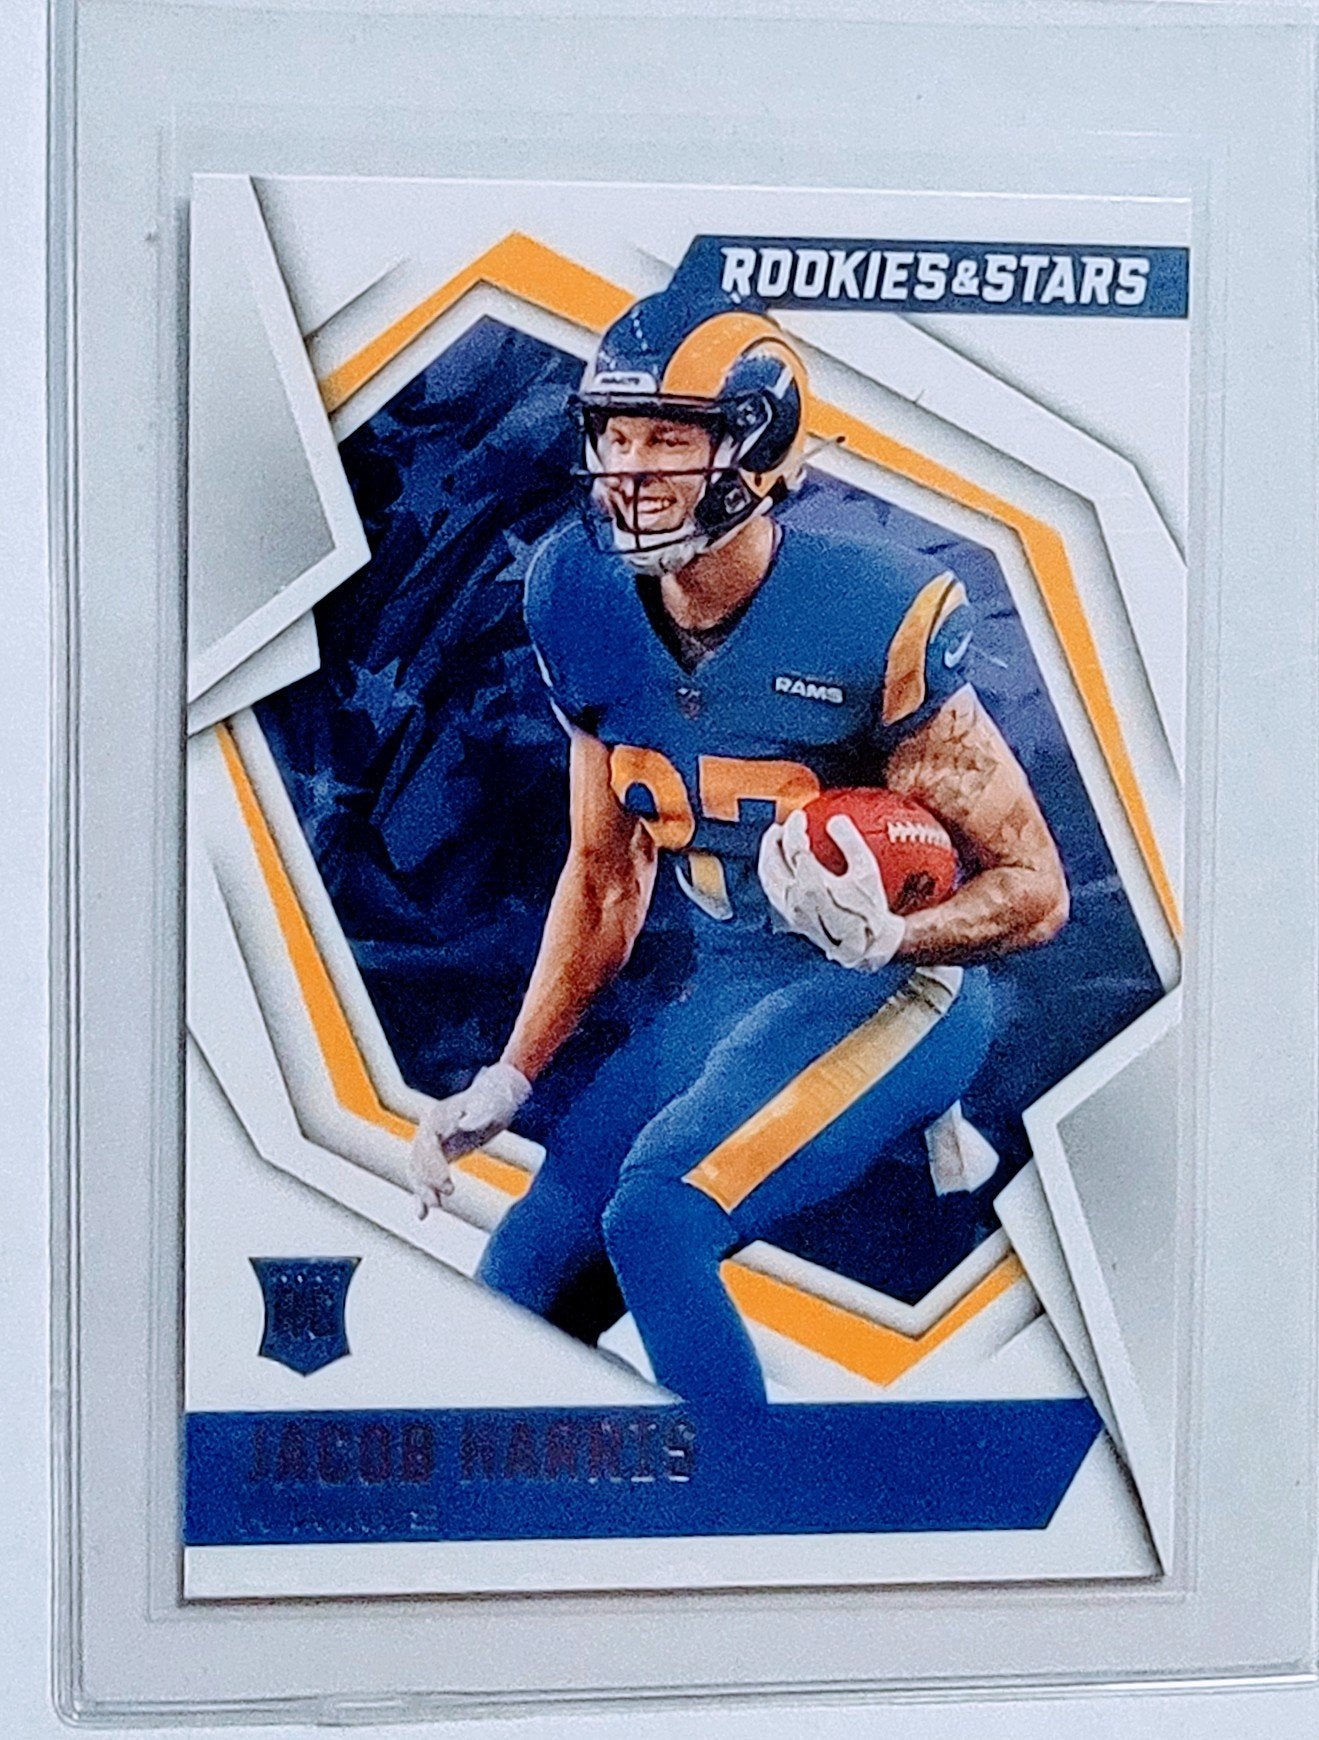 2021 Panini Rookies and Stars Jacob Harris Rookie Football Card AVM1_1a simple Xclusive Collectibles   